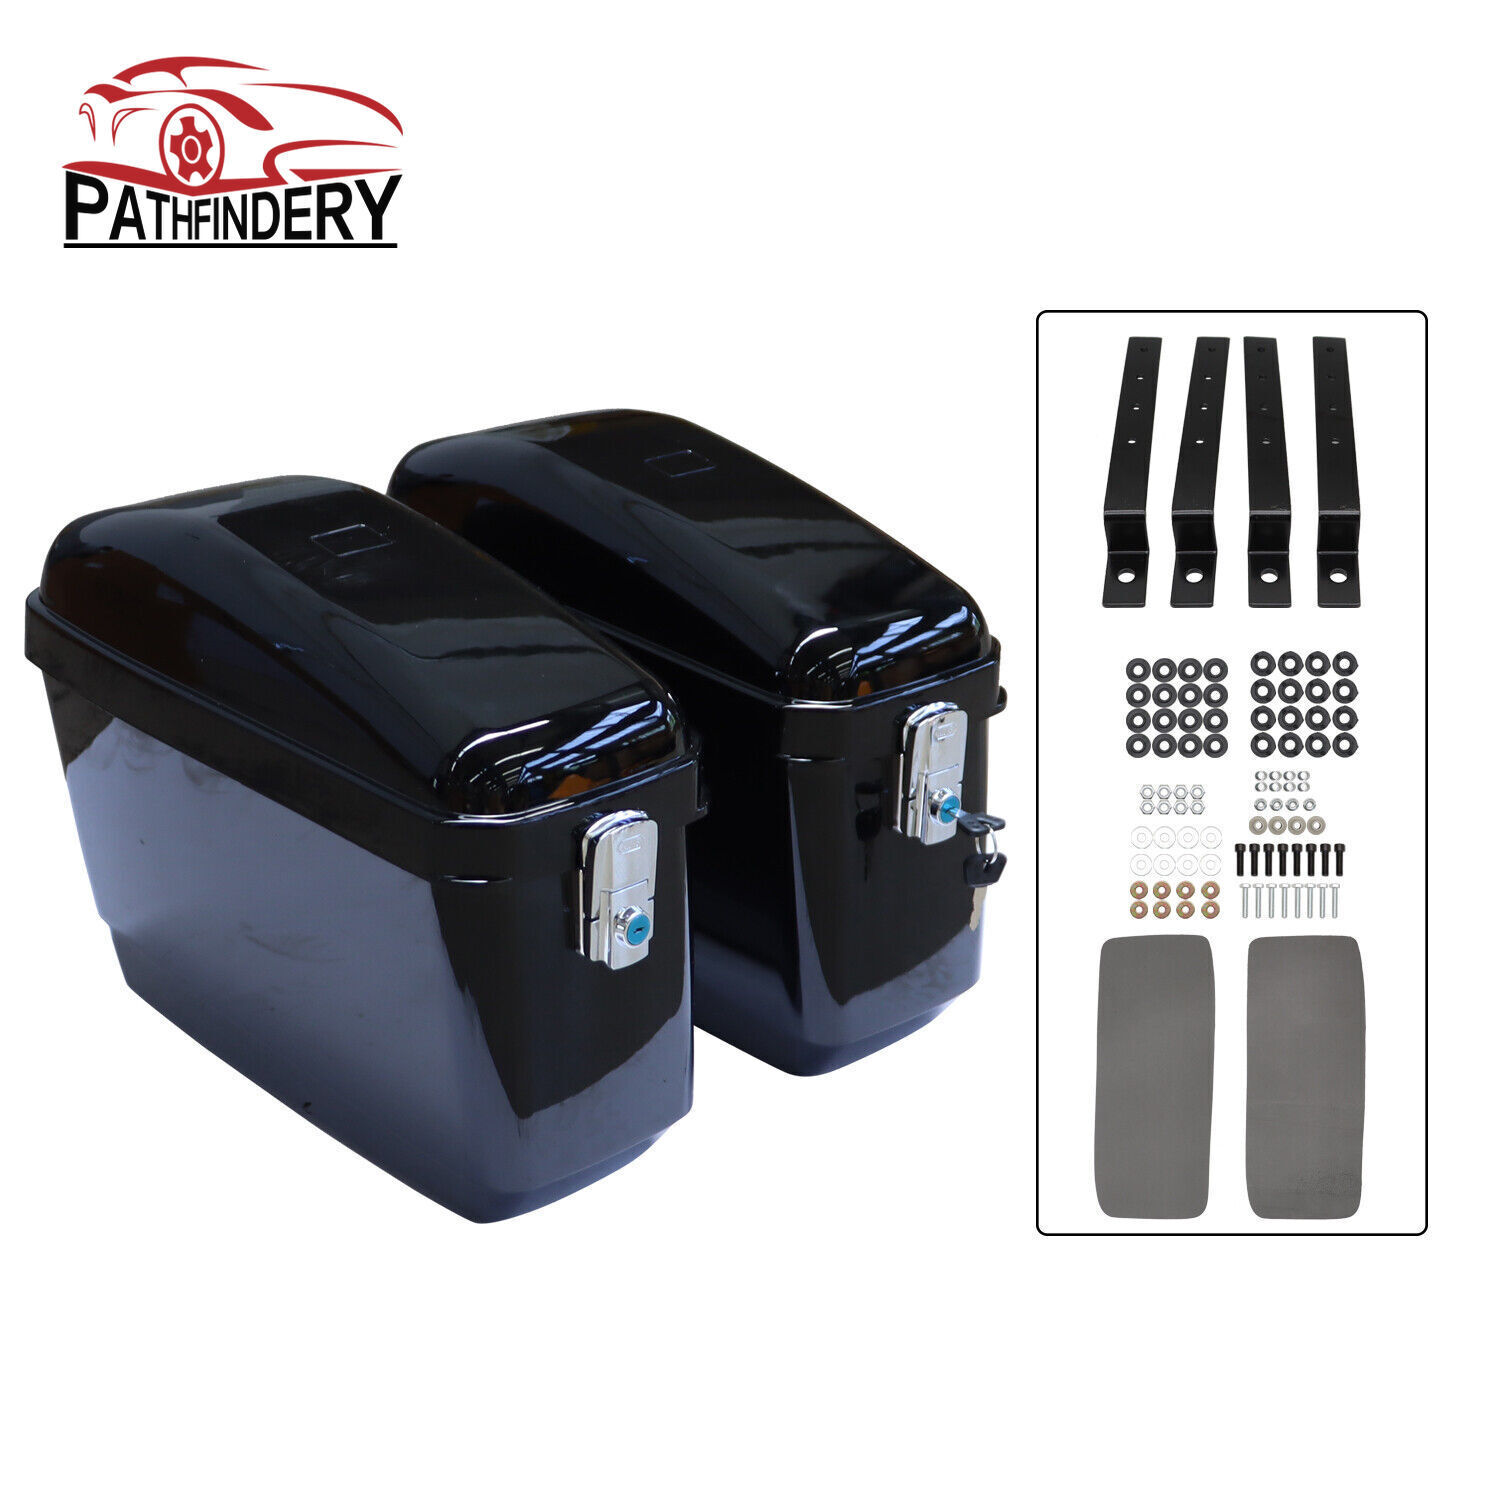 For Cruiser Motorcycle Hard Saddle Bags Trunk Luggage With Mounting Brackets 